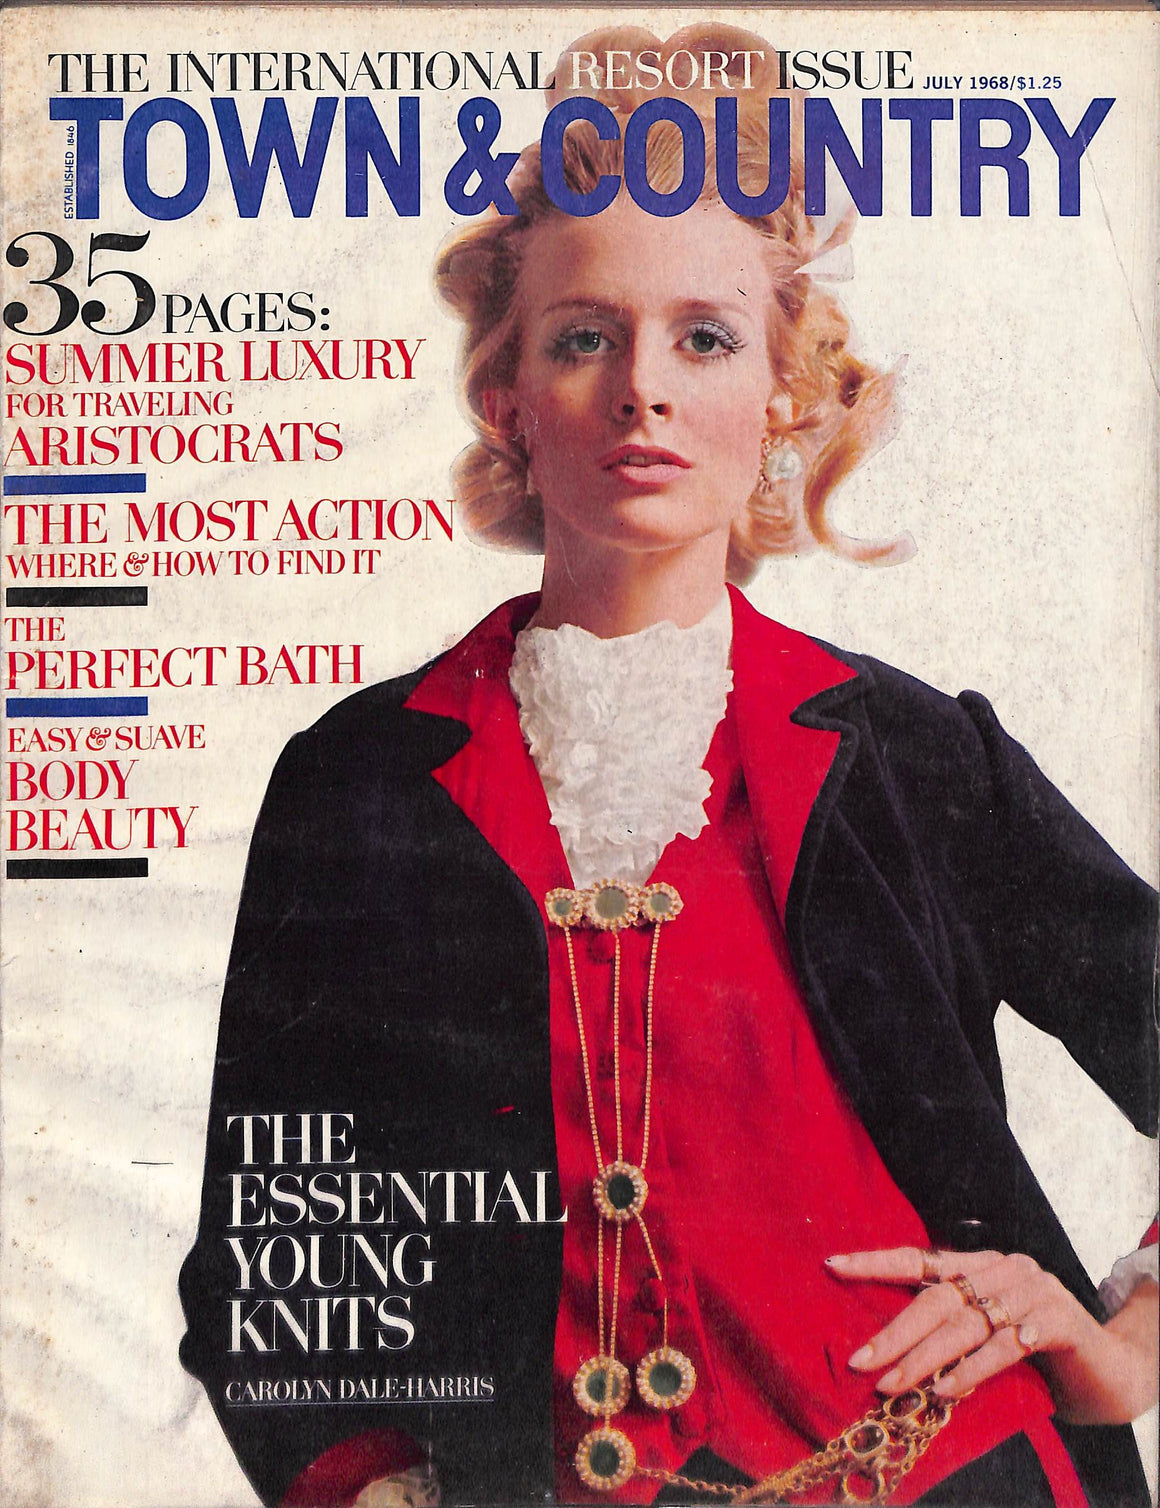 "Town & Country The International Resort Issue" July 1968